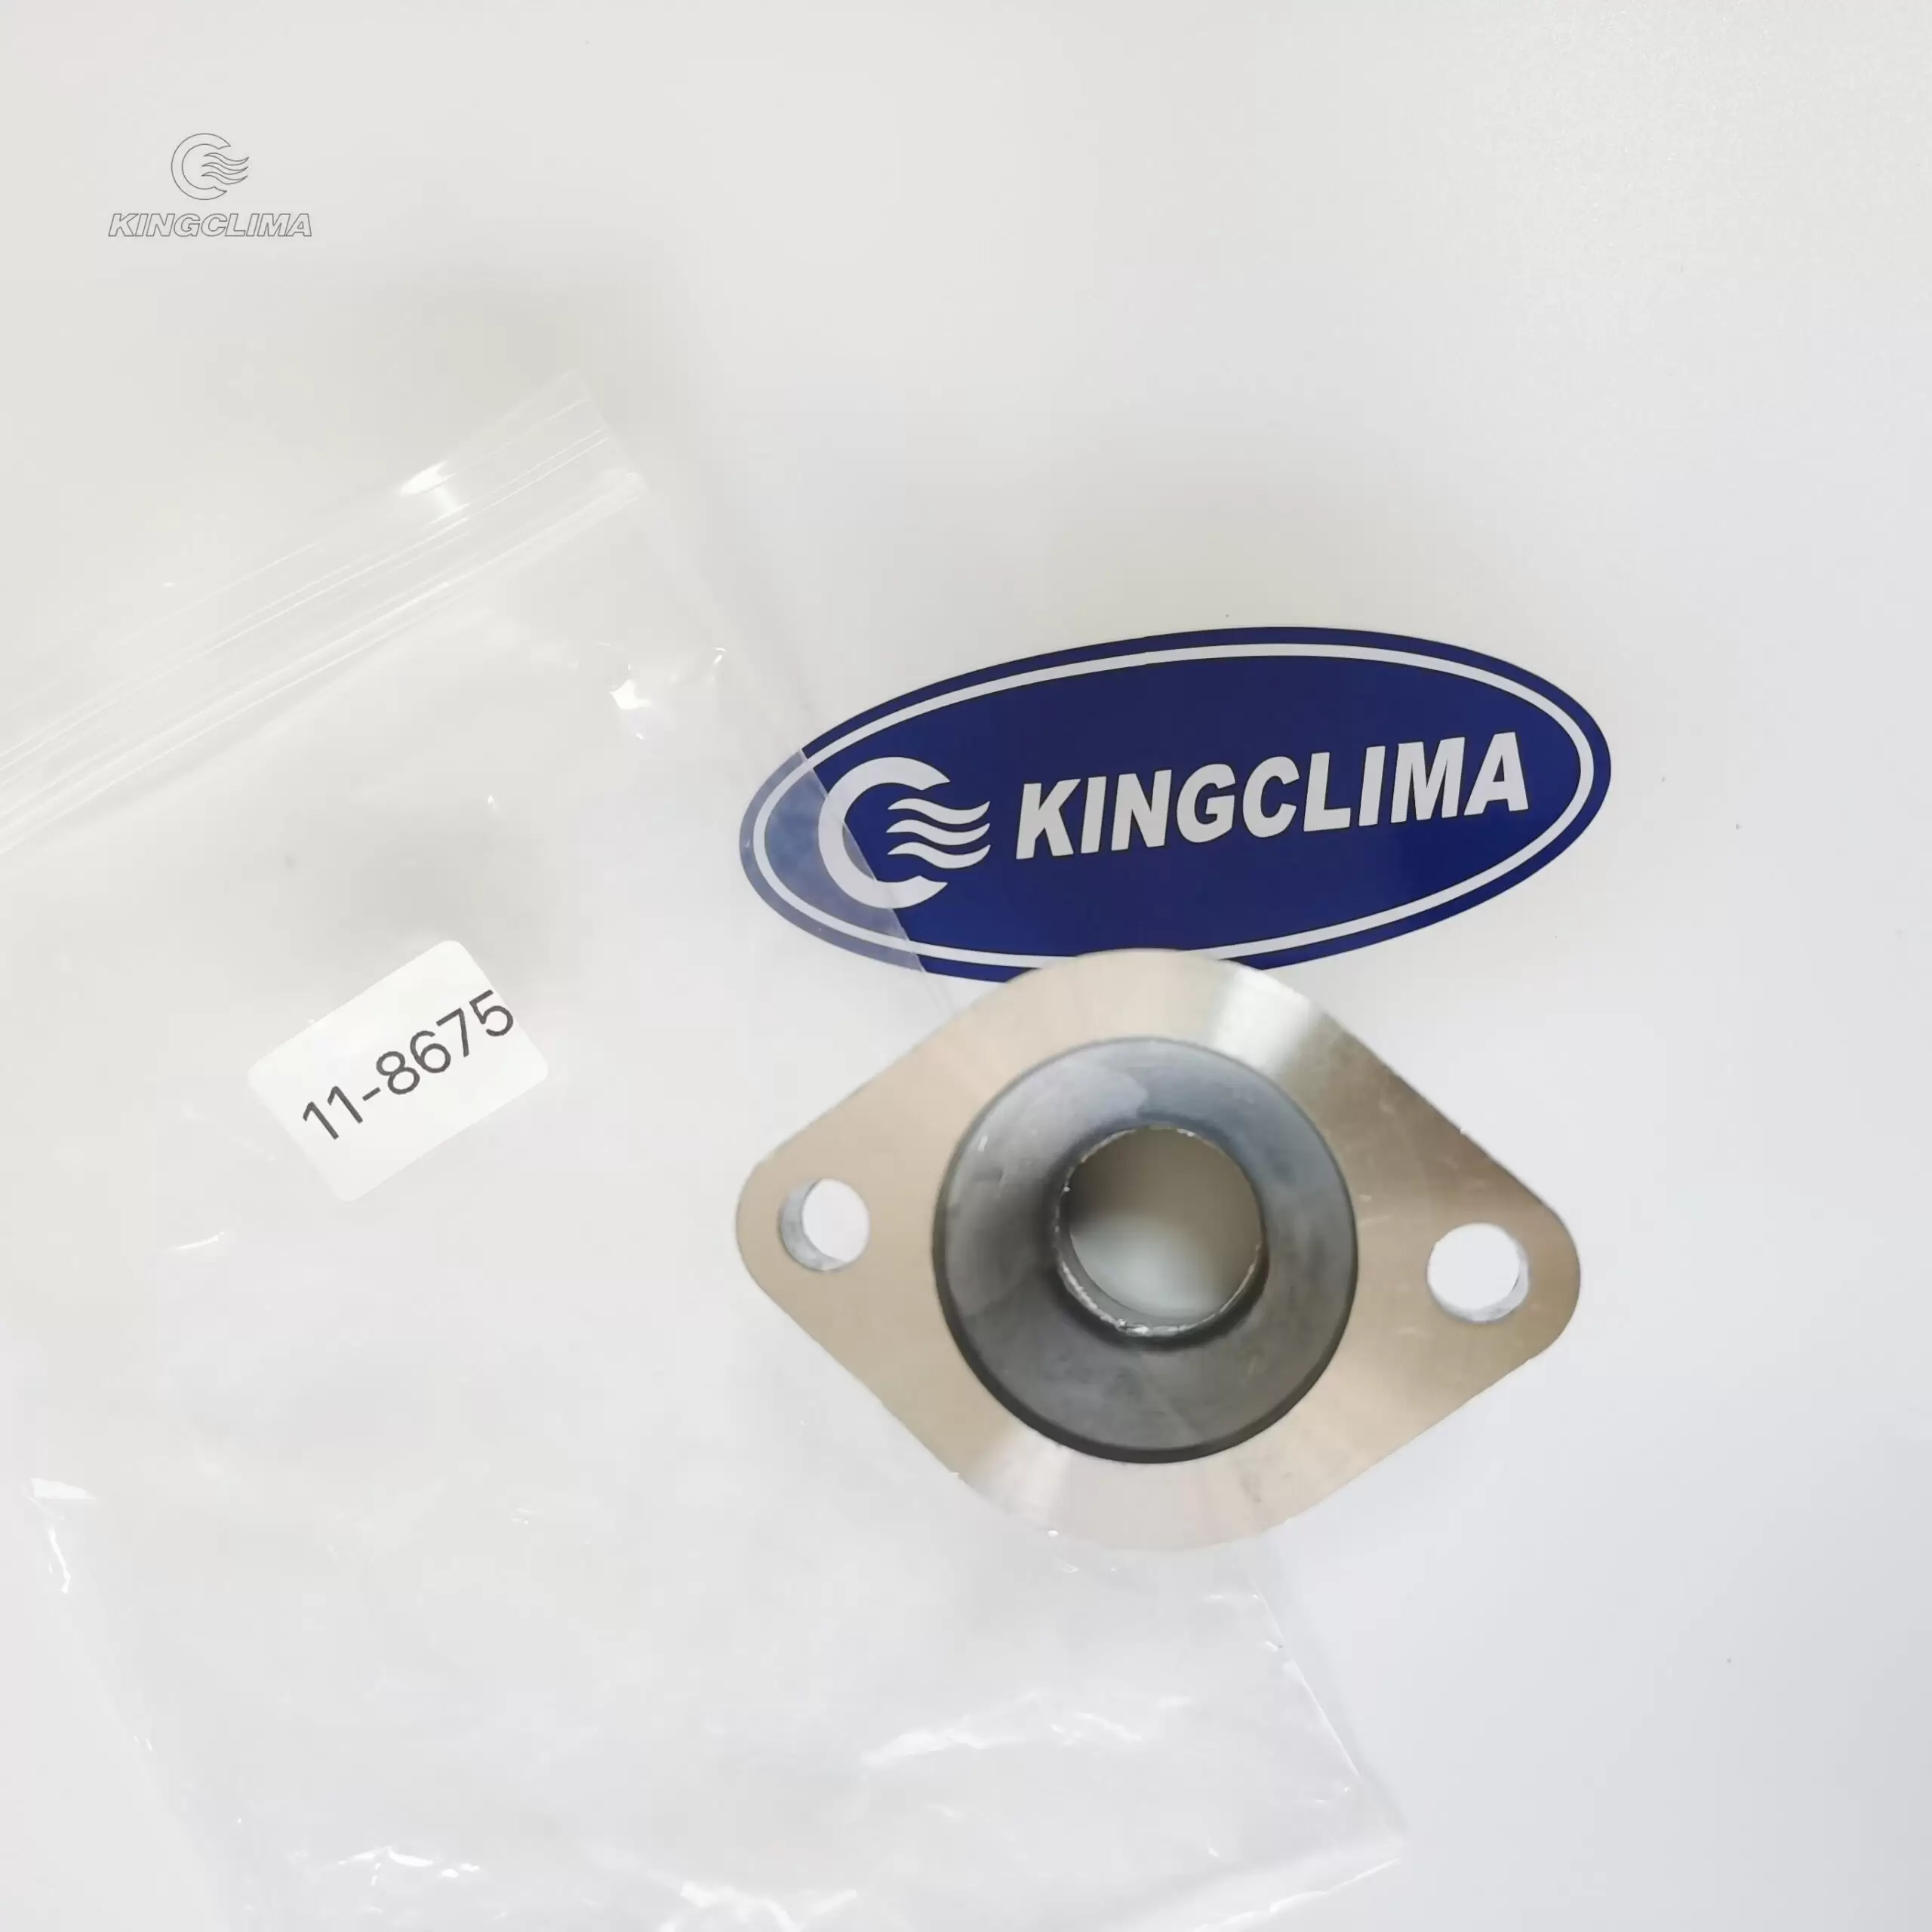 cover 11-8675 thermo king parts for refrigeration units